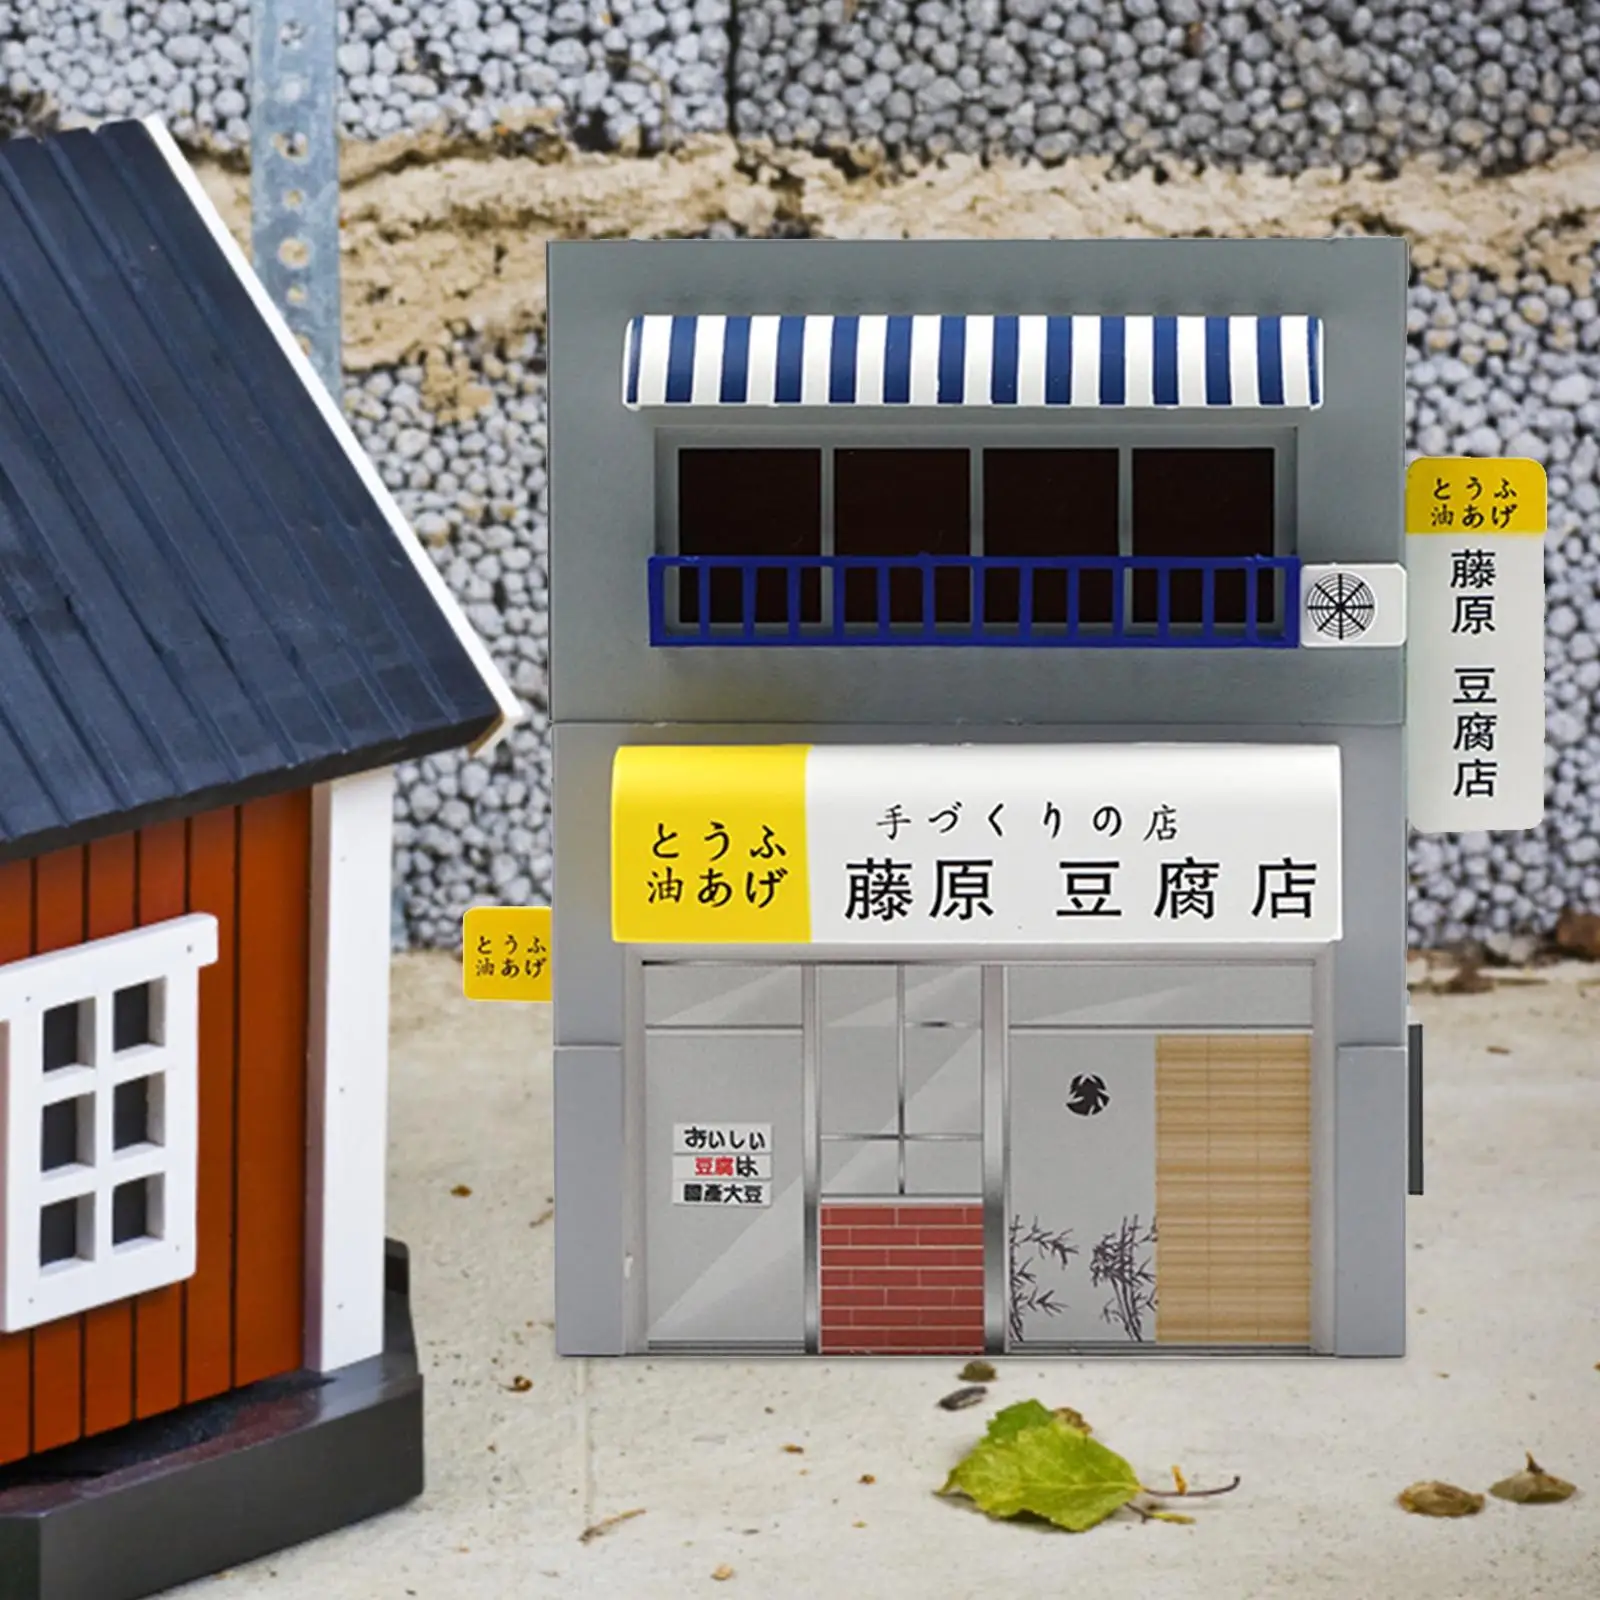 1:64 Scale Tofu Shop Diorama Model Movie Props S Scale Desktop Sand Table Architectural Layout Townscape Scenery Store Decor